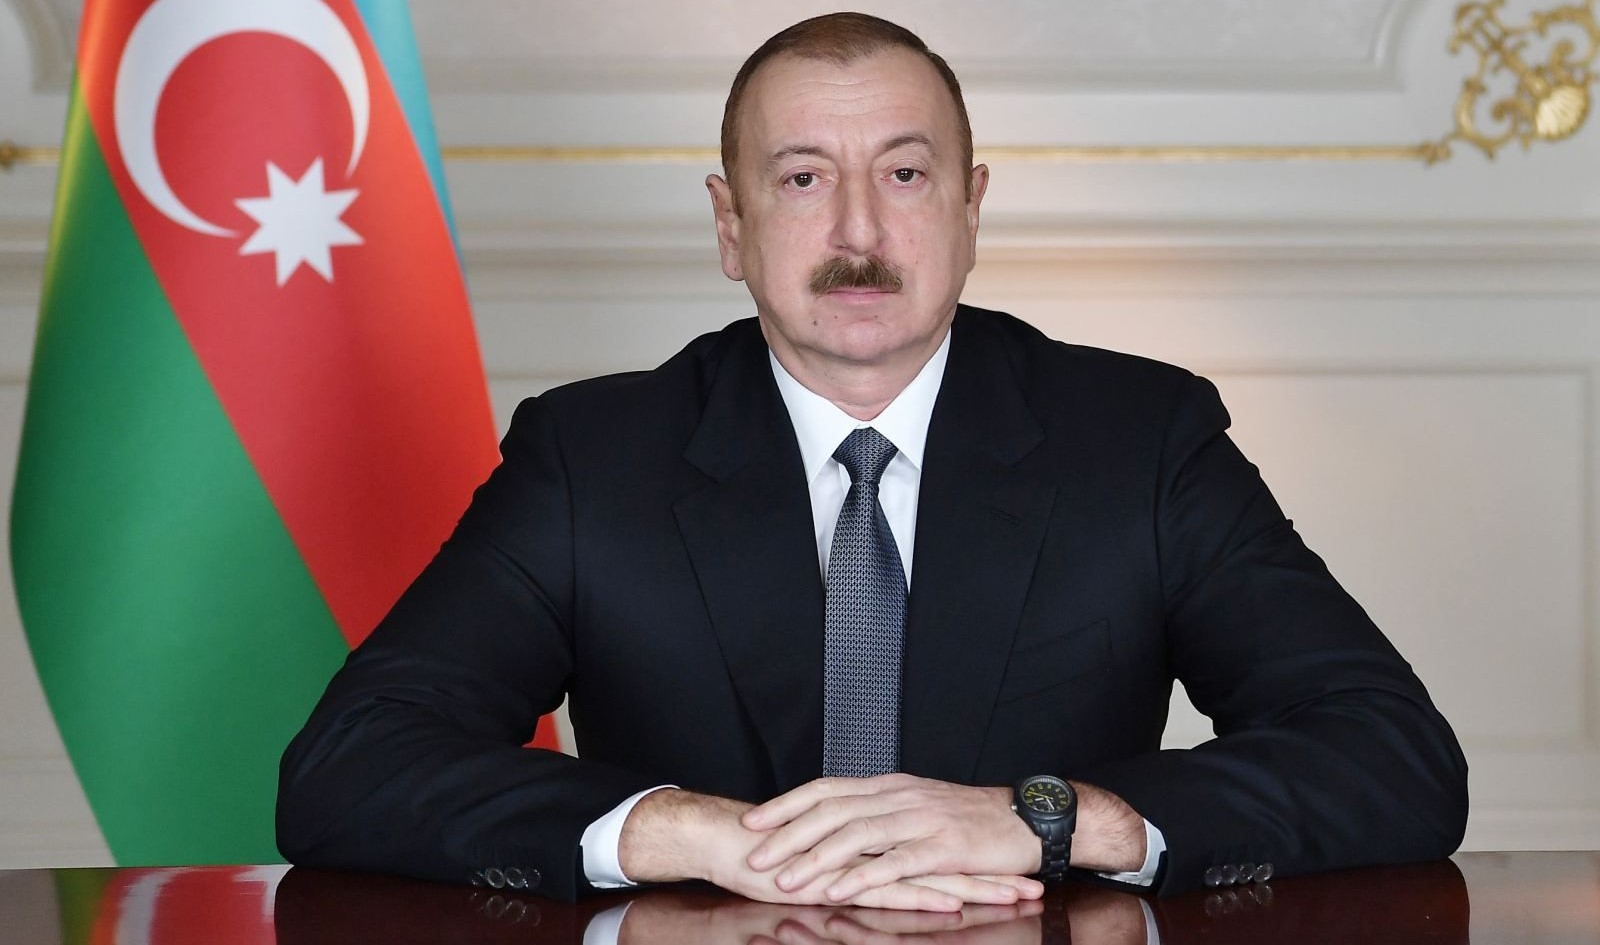 Presidents of Azerbaijan and Türkiye participated in opening of new Air Force Central Command Post